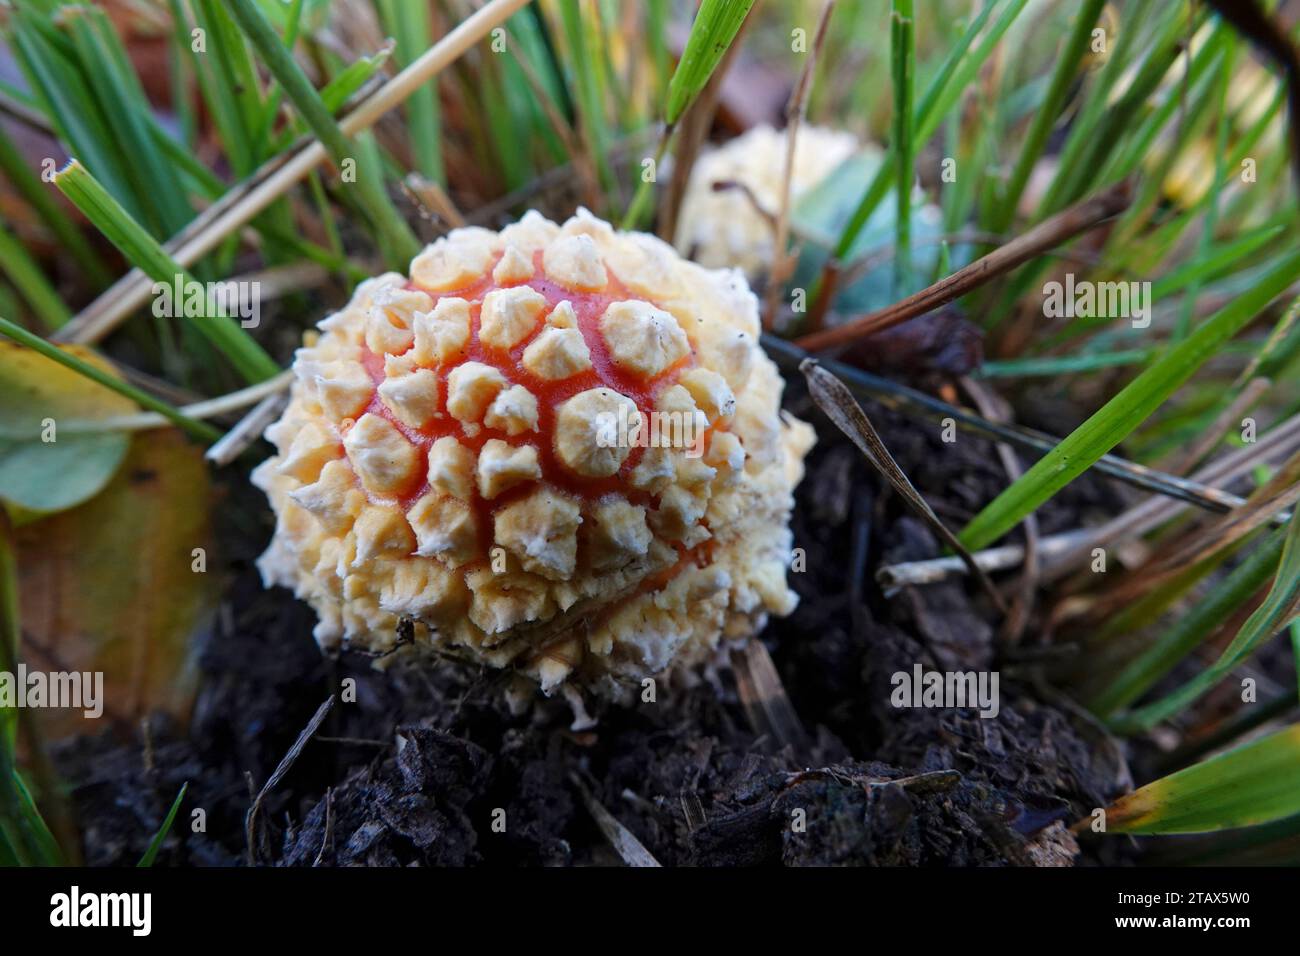 Natural closeup on a round ball-shaped emerging red highly toxic Fly agaric mushroom, Amanita muscaria, on the forest floor Stock Photo